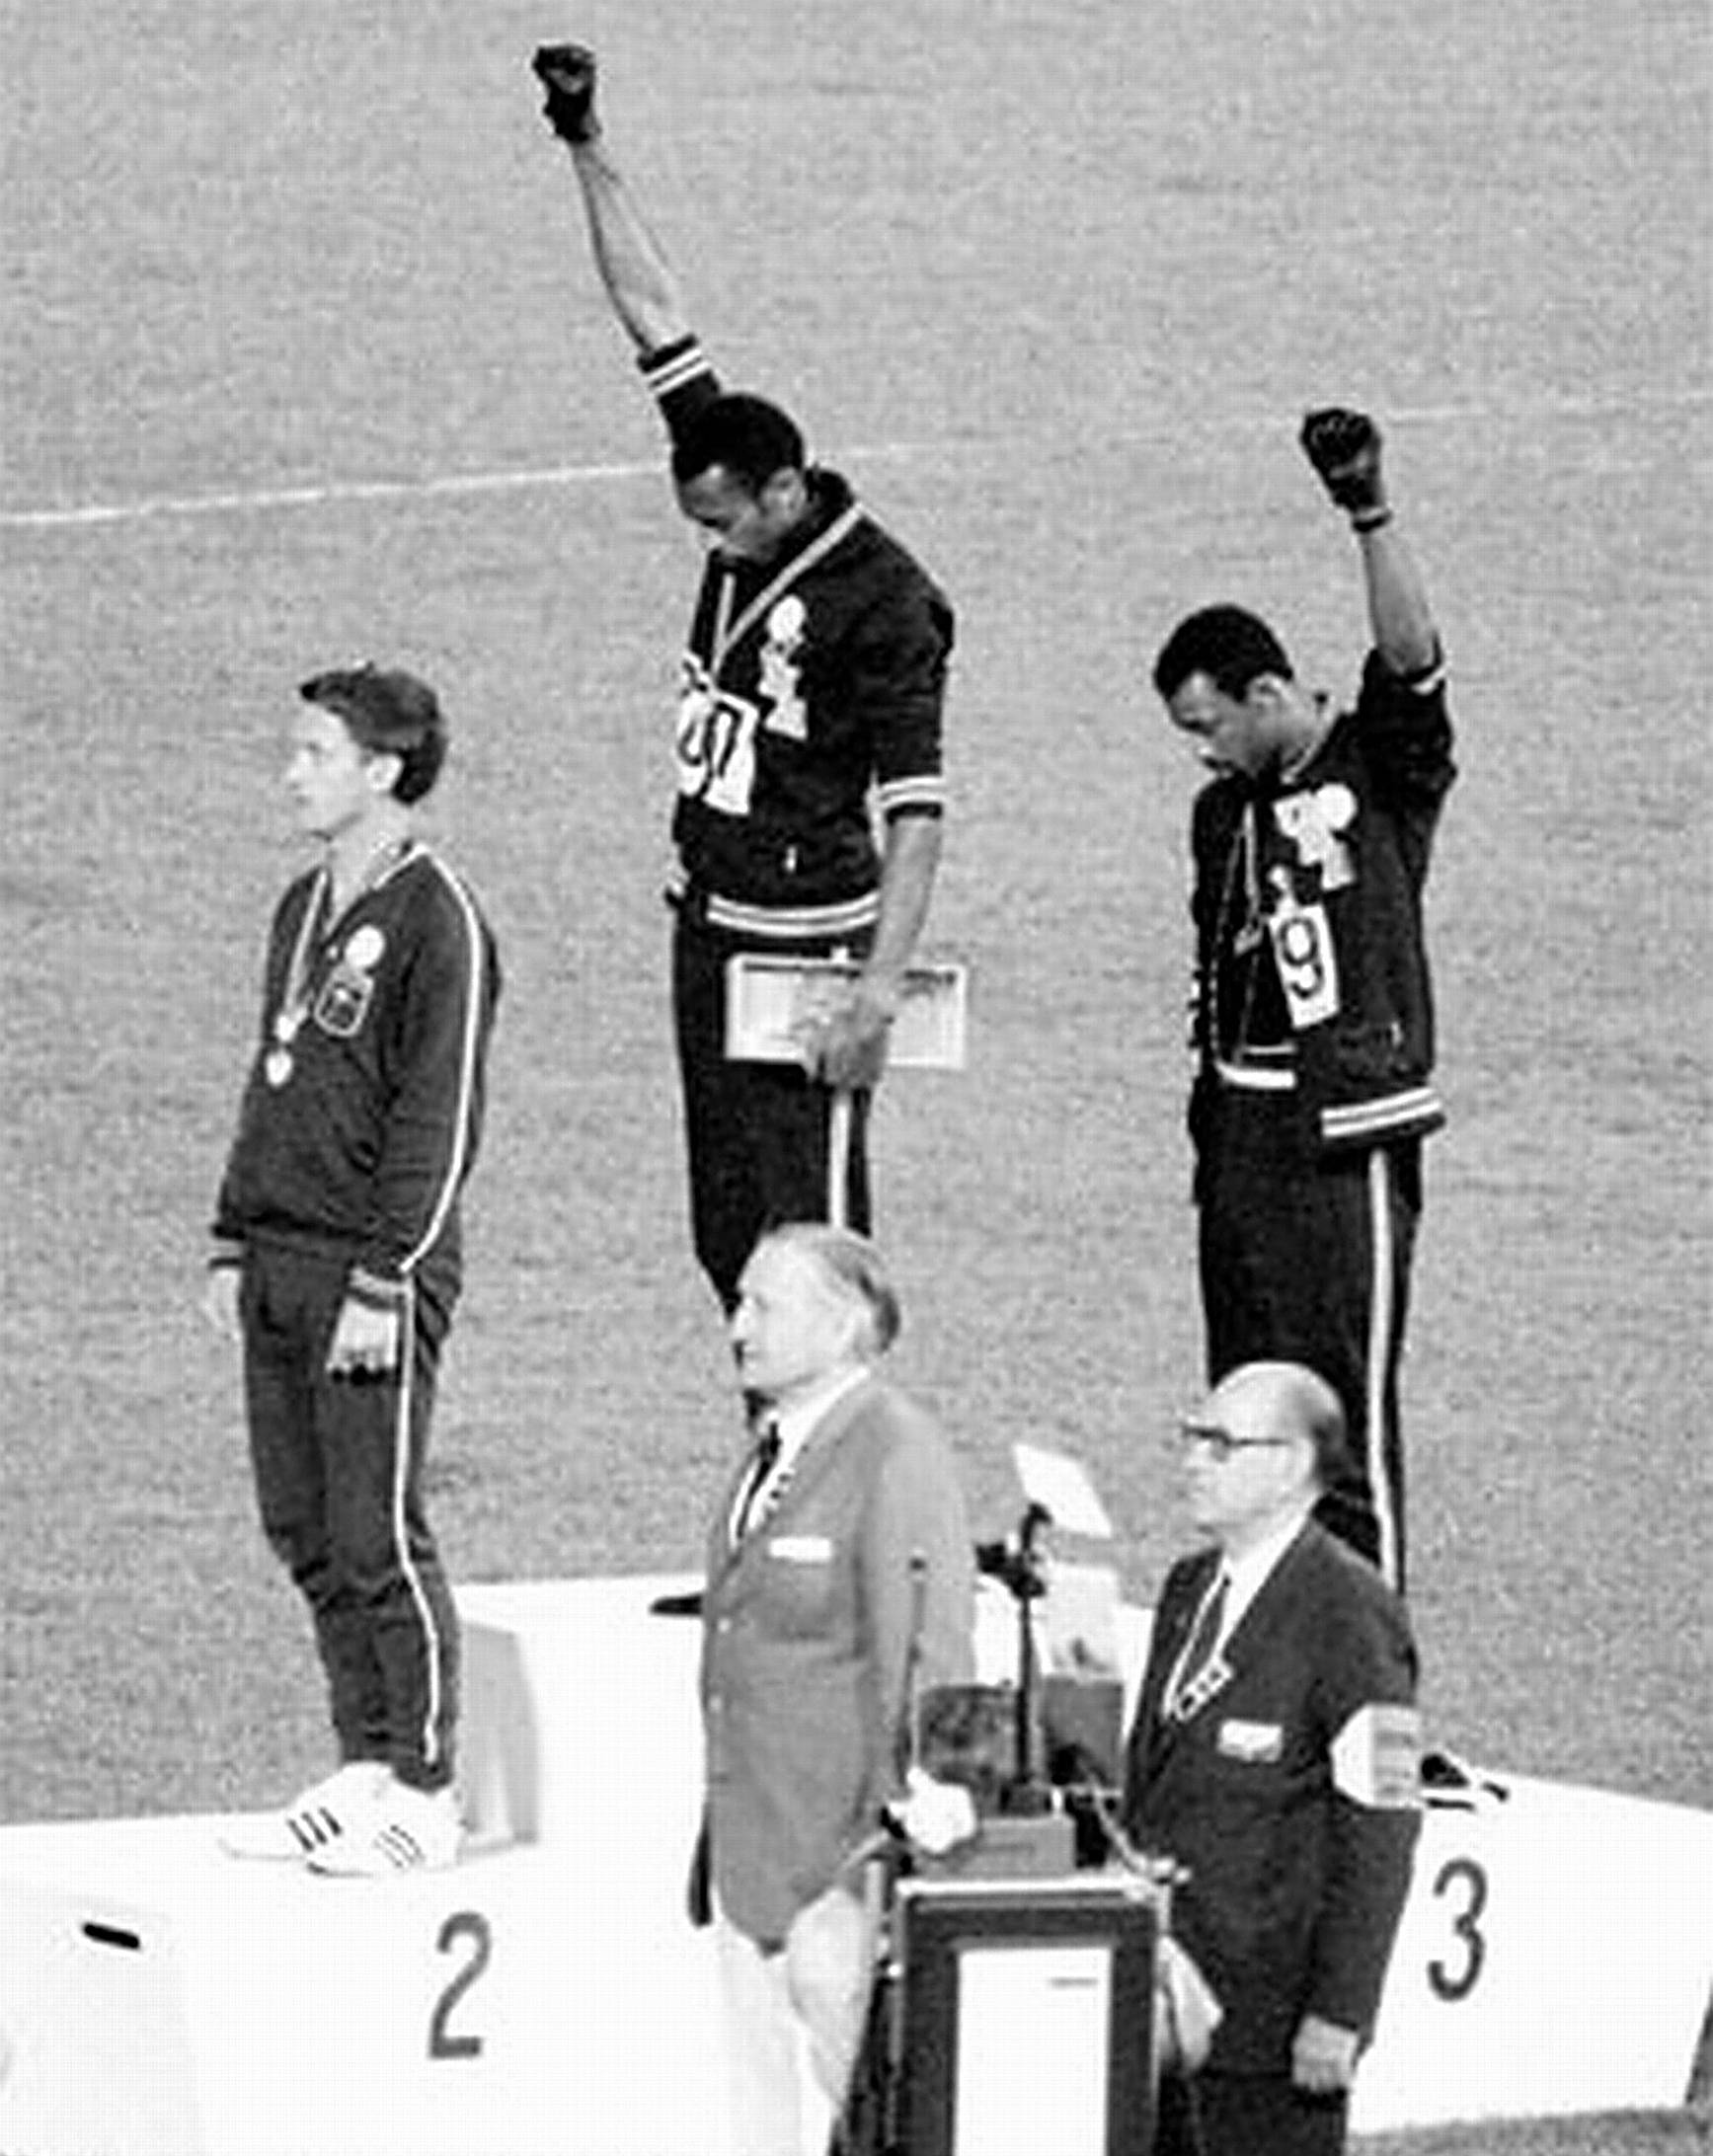 Tommie Smith and John Carlos - At the 1968 Olympics in Mexico City, the iconic image of Tommie Smith and John Carlos raising their gloved fists in the air in a Black Power salute as the American anthem played made headlines around the world, stirring controversy and getting the two men banned from the Olympics. At the games, Smith won the gold medal for the 200-meter dash and Carlos won the bronze.&nbsp;(Photo: Universal History Archive/Getty Images)